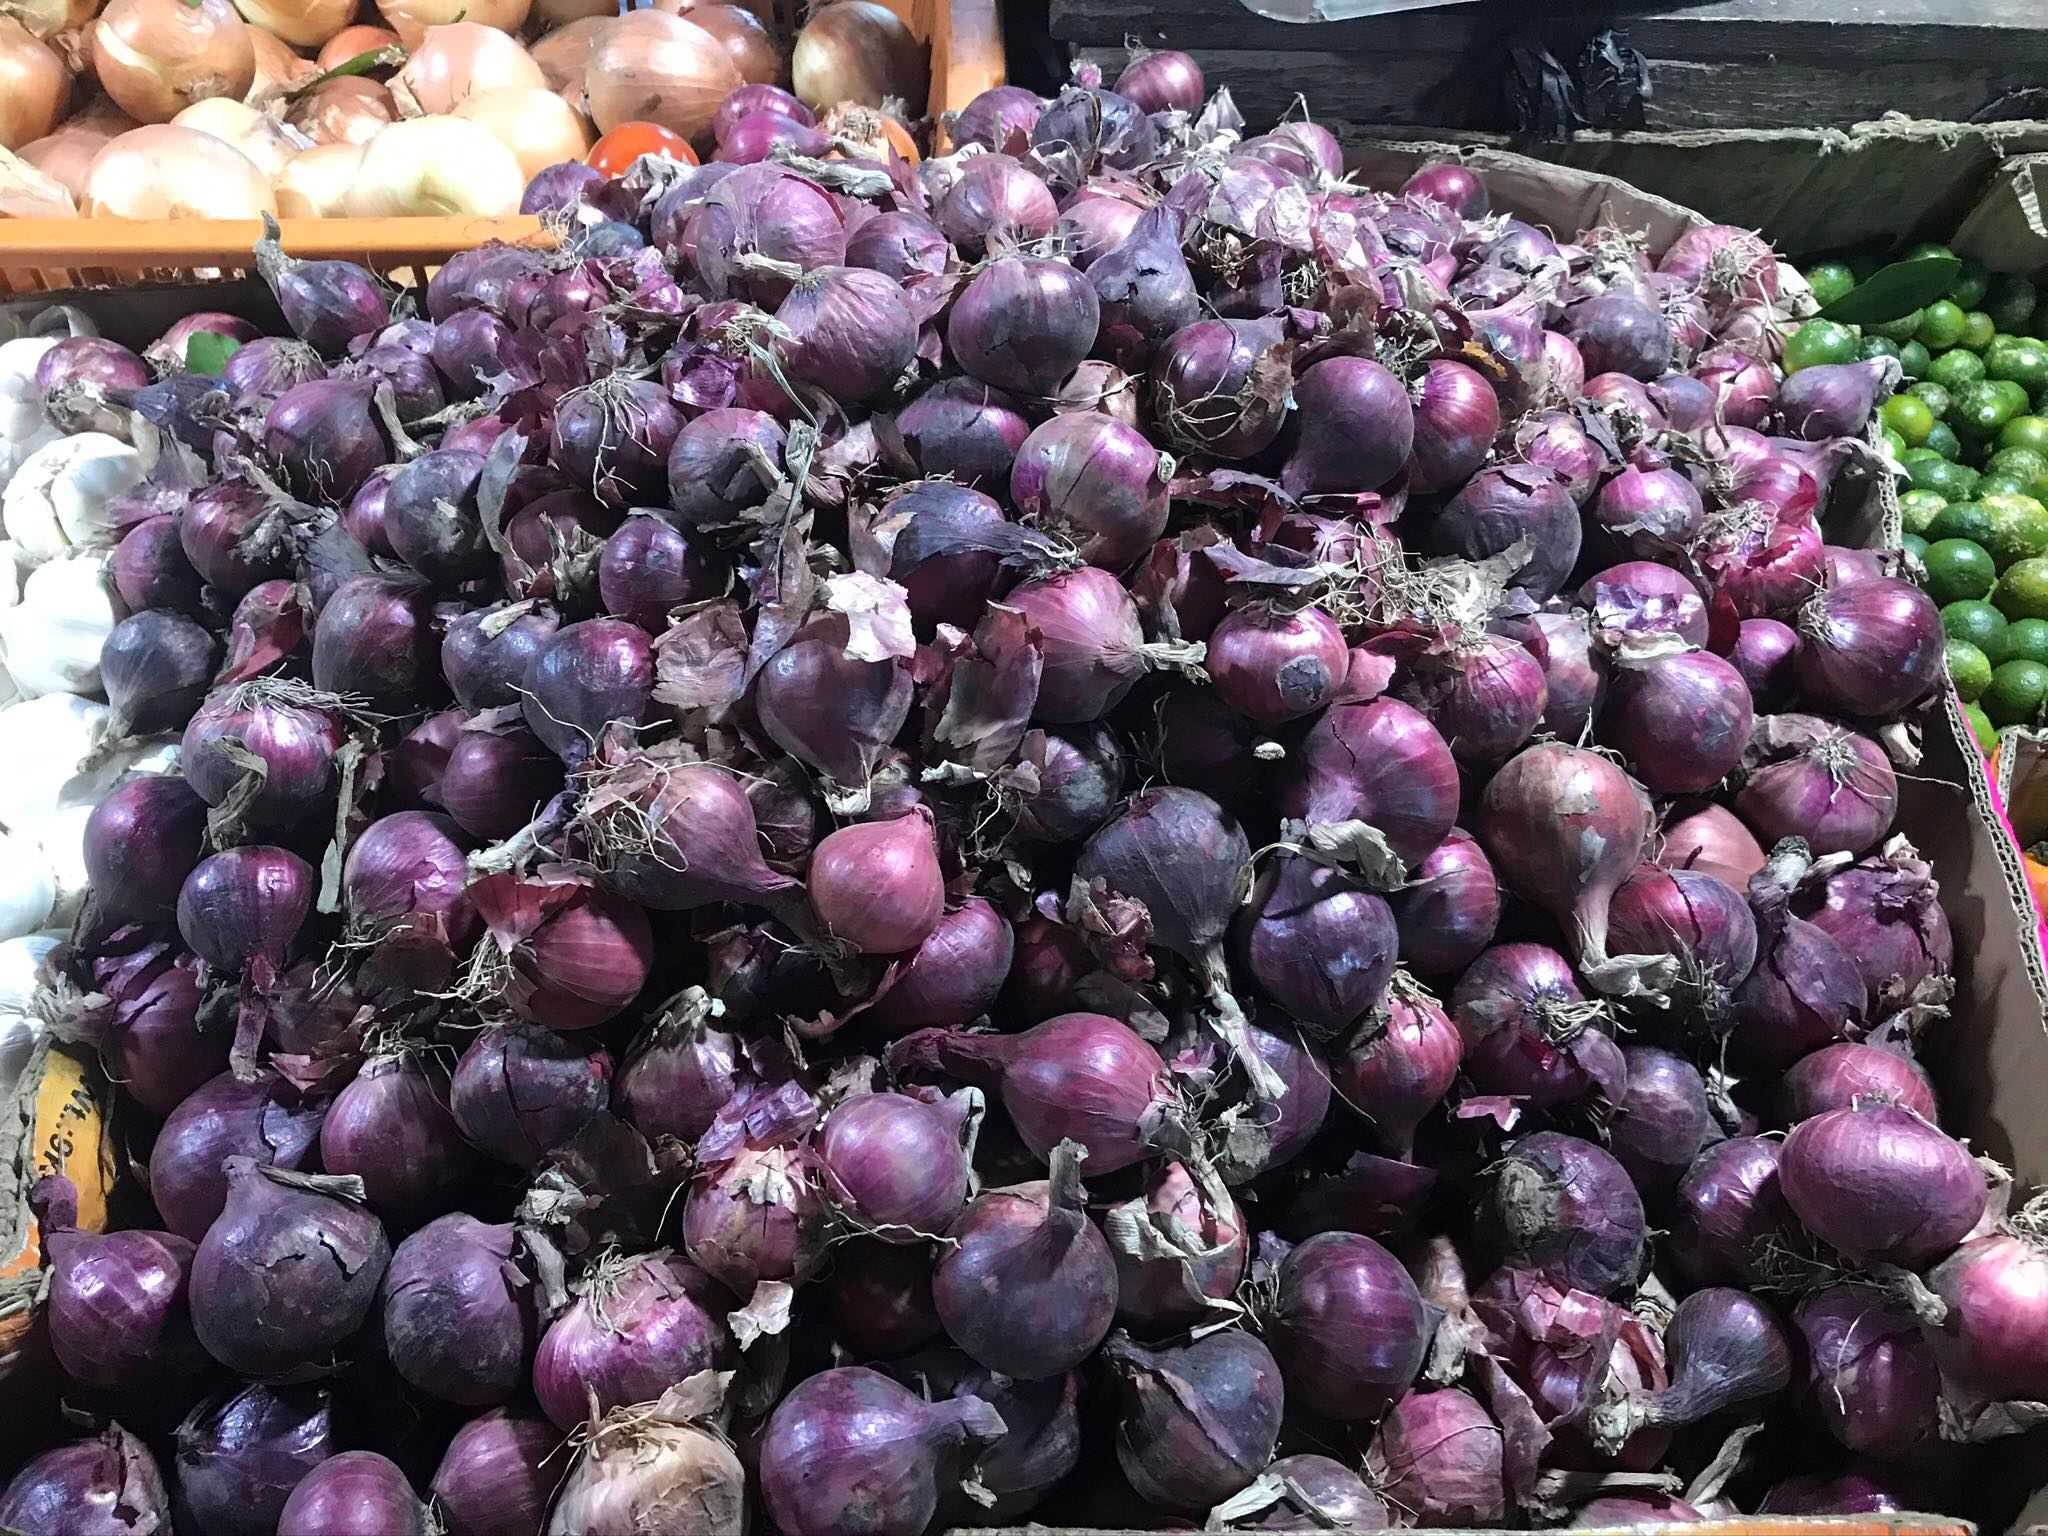 Bureau of Plant Industry assures sufficient supply of onion amid rising market price